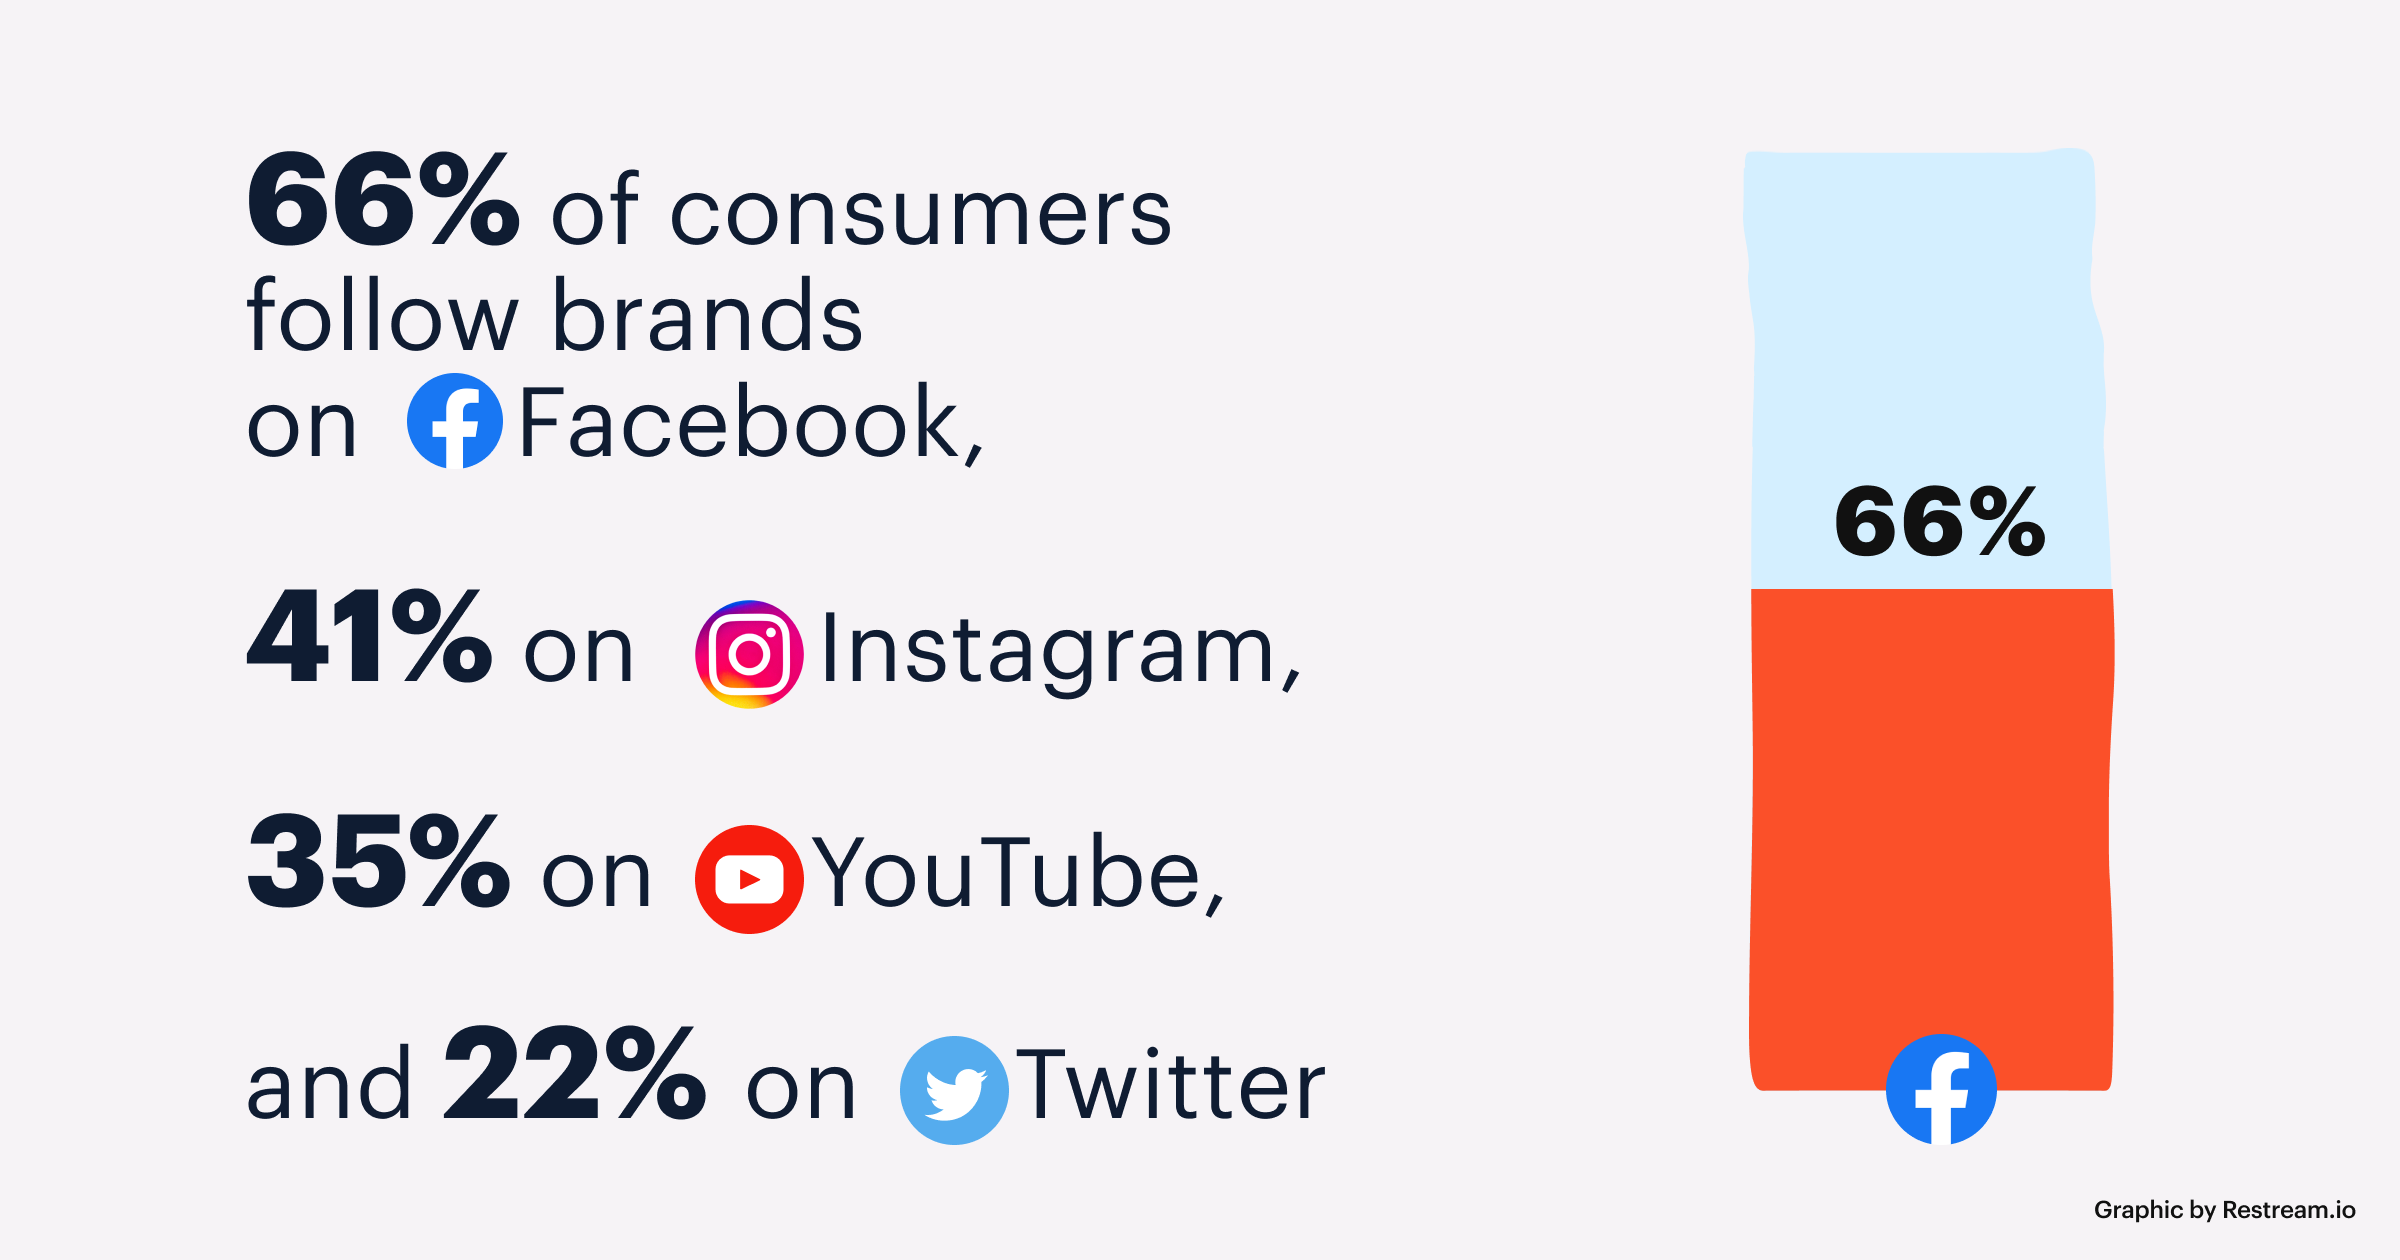 Statistics on how consumers follow brands on social networks